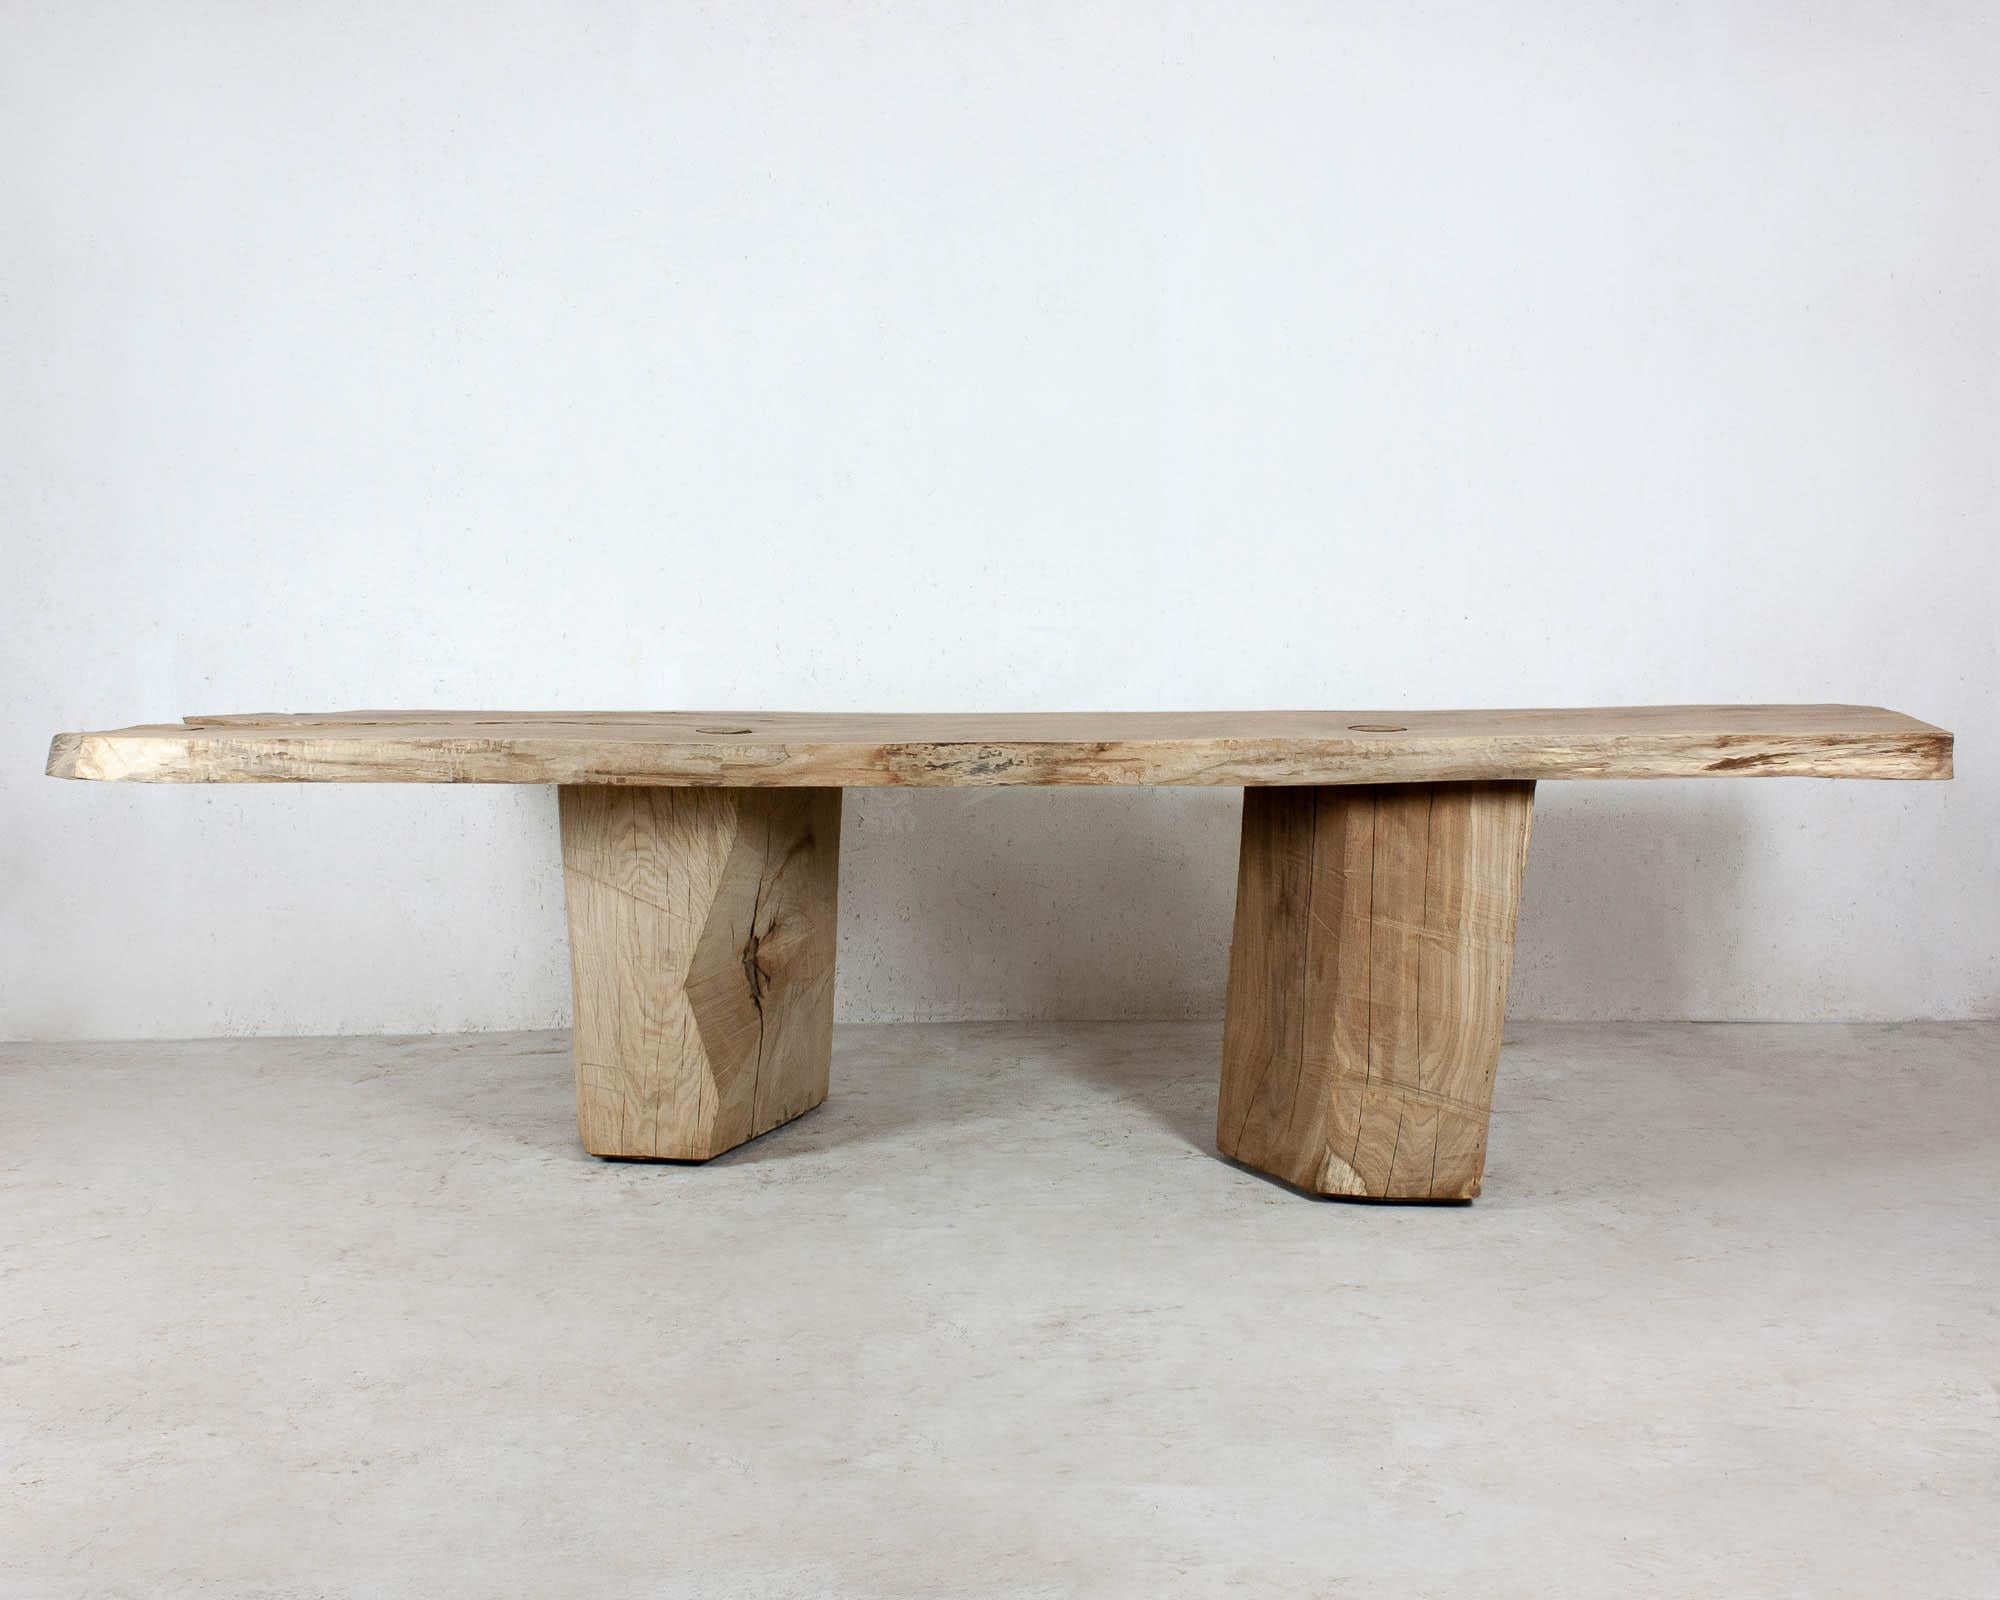 Massive dining table made of solid oak (+ linseed oil)
(Outdoor use OK)


Warm furniture’s made by Russian designer Denis Milovanov for 'Soha Concept' design studio. Simplicity of shapes. Authentic material.
Wooden items are created from oak